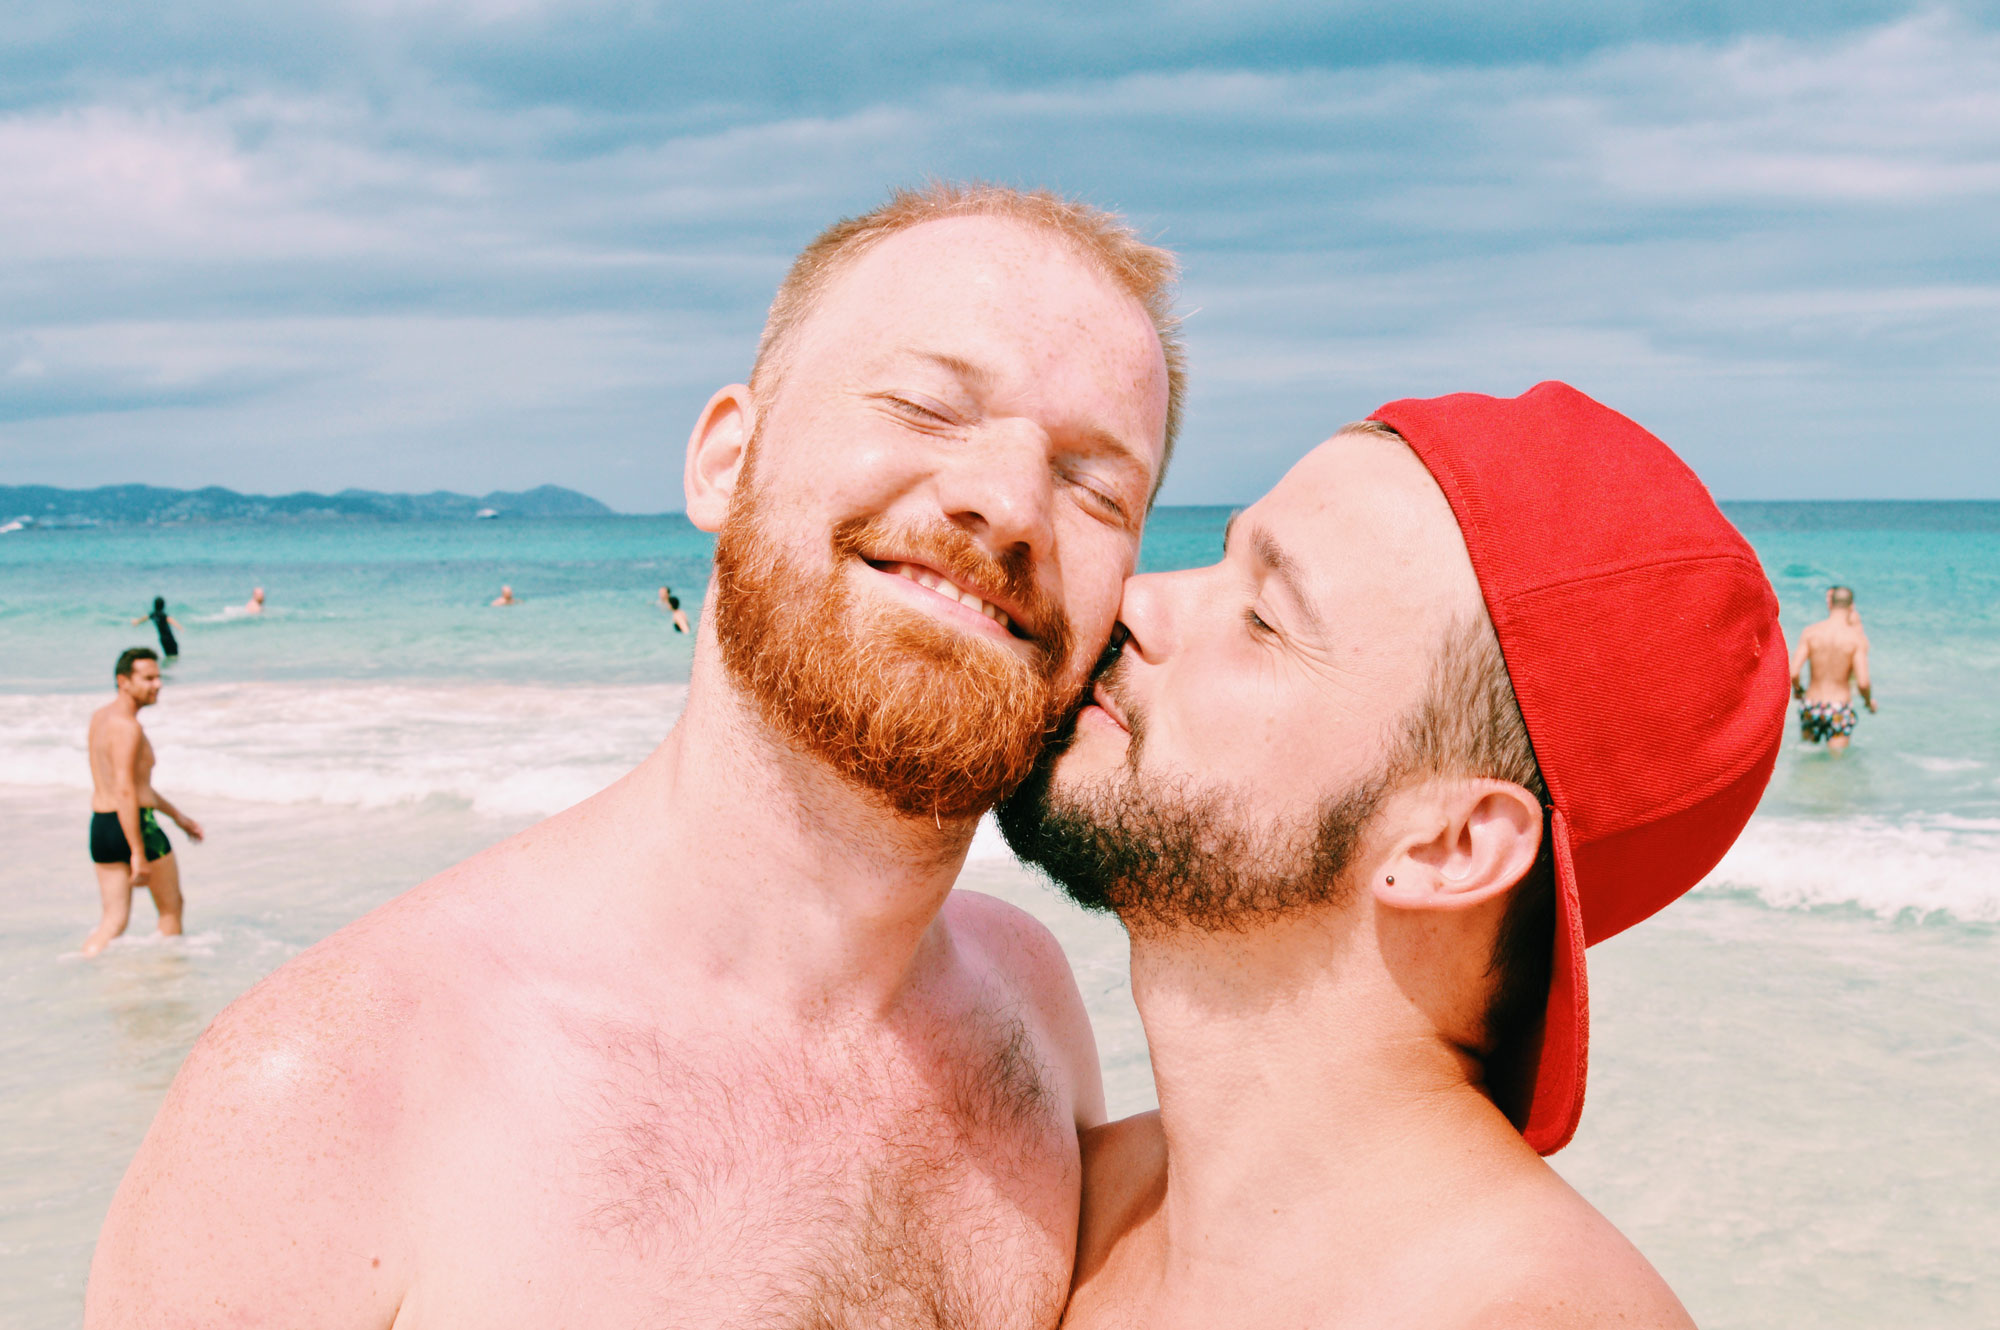 Spartacus Gay Travel Index 2023: How gay-friendly is the World?